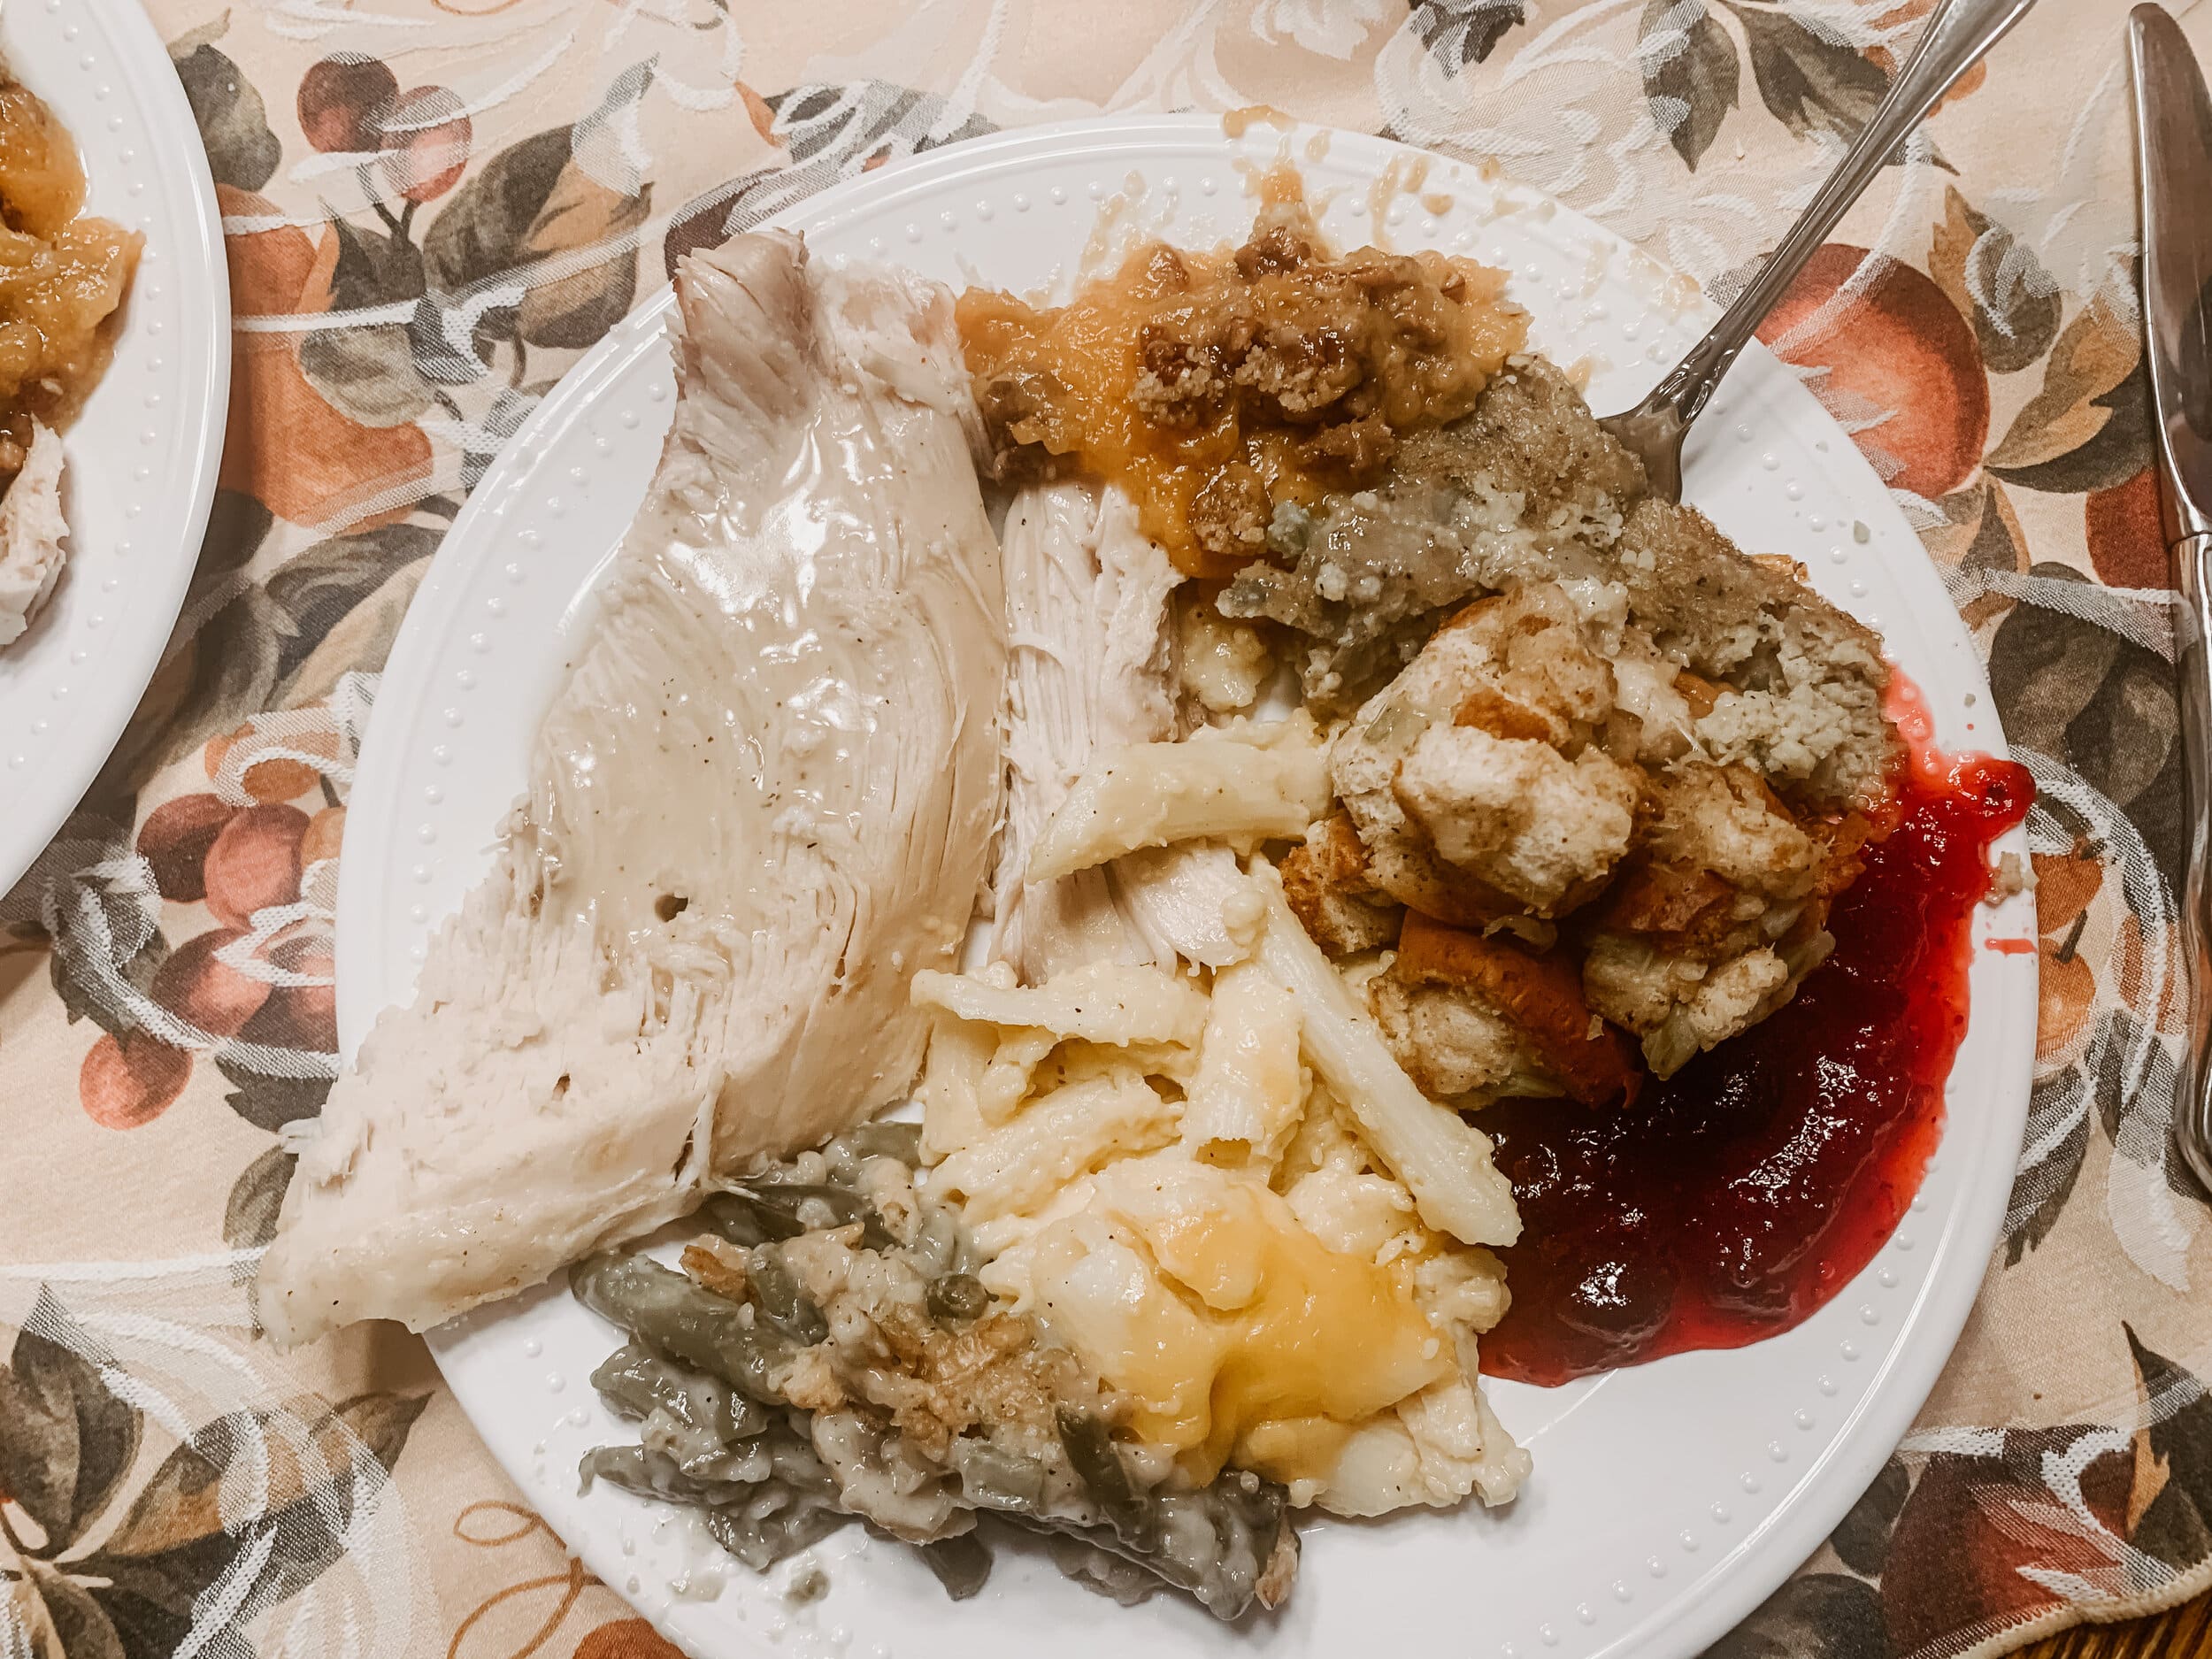 Stable items for a typical southern Thanksgiving meal include turkey, casserole, dressing, cranberry sauce and mac-n-cheese.